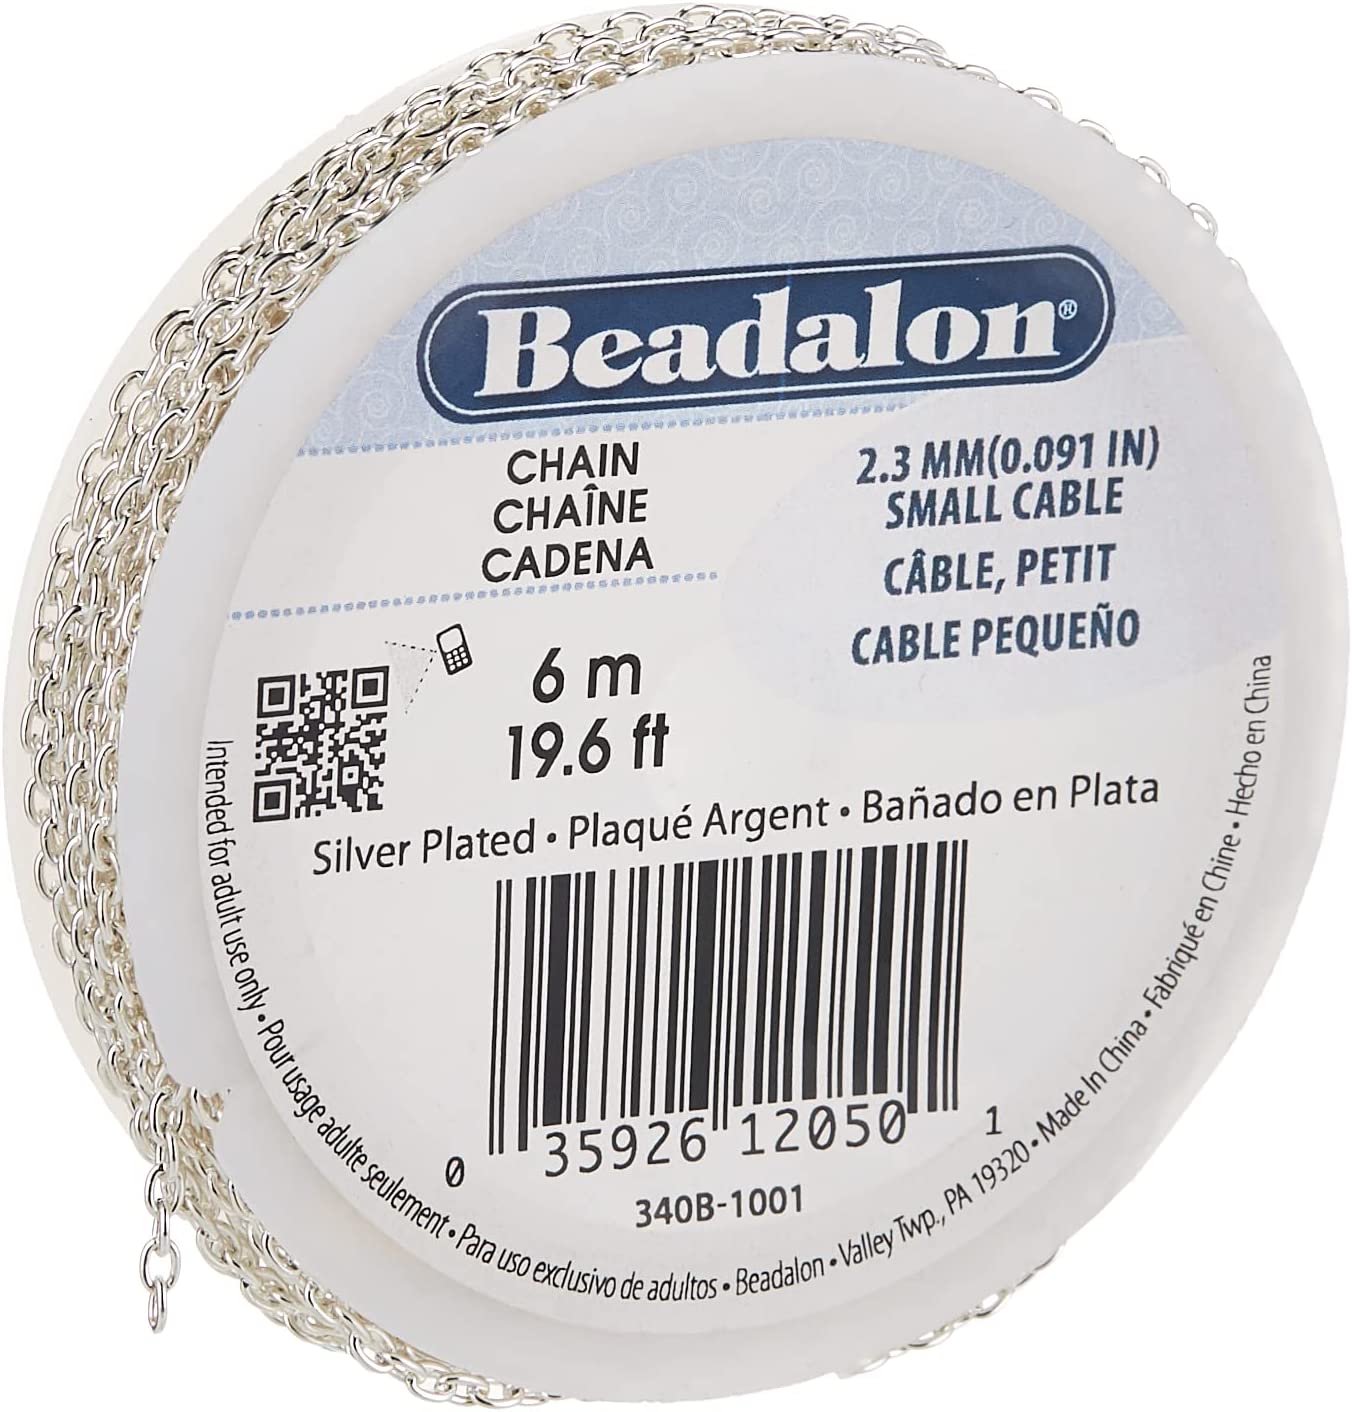 Beadalon 2.3mm Jewelry Making Chain, 6m, Small Cable, Silver Plated